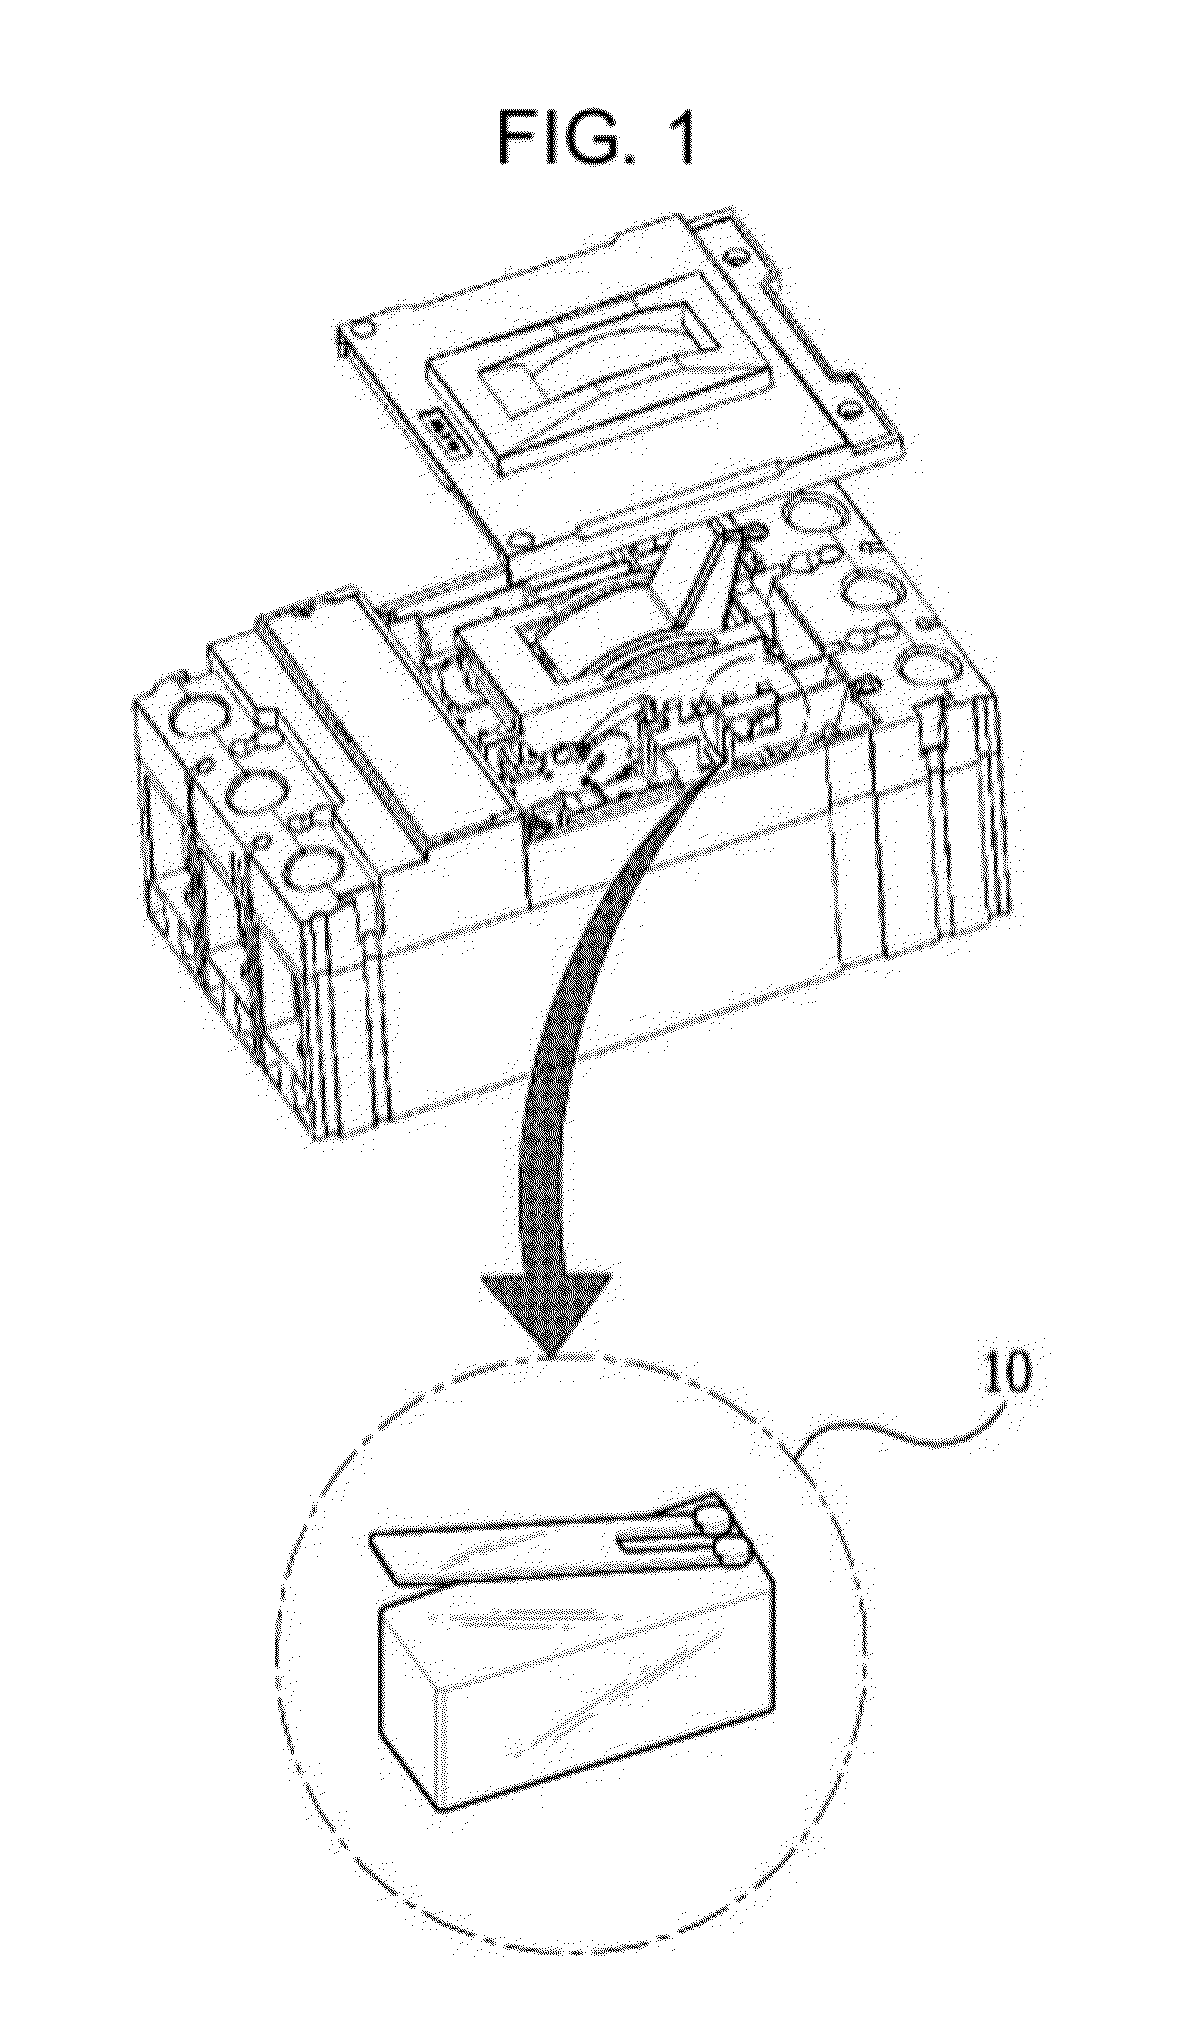 Remote electrical safety diagnosis system and apparatus